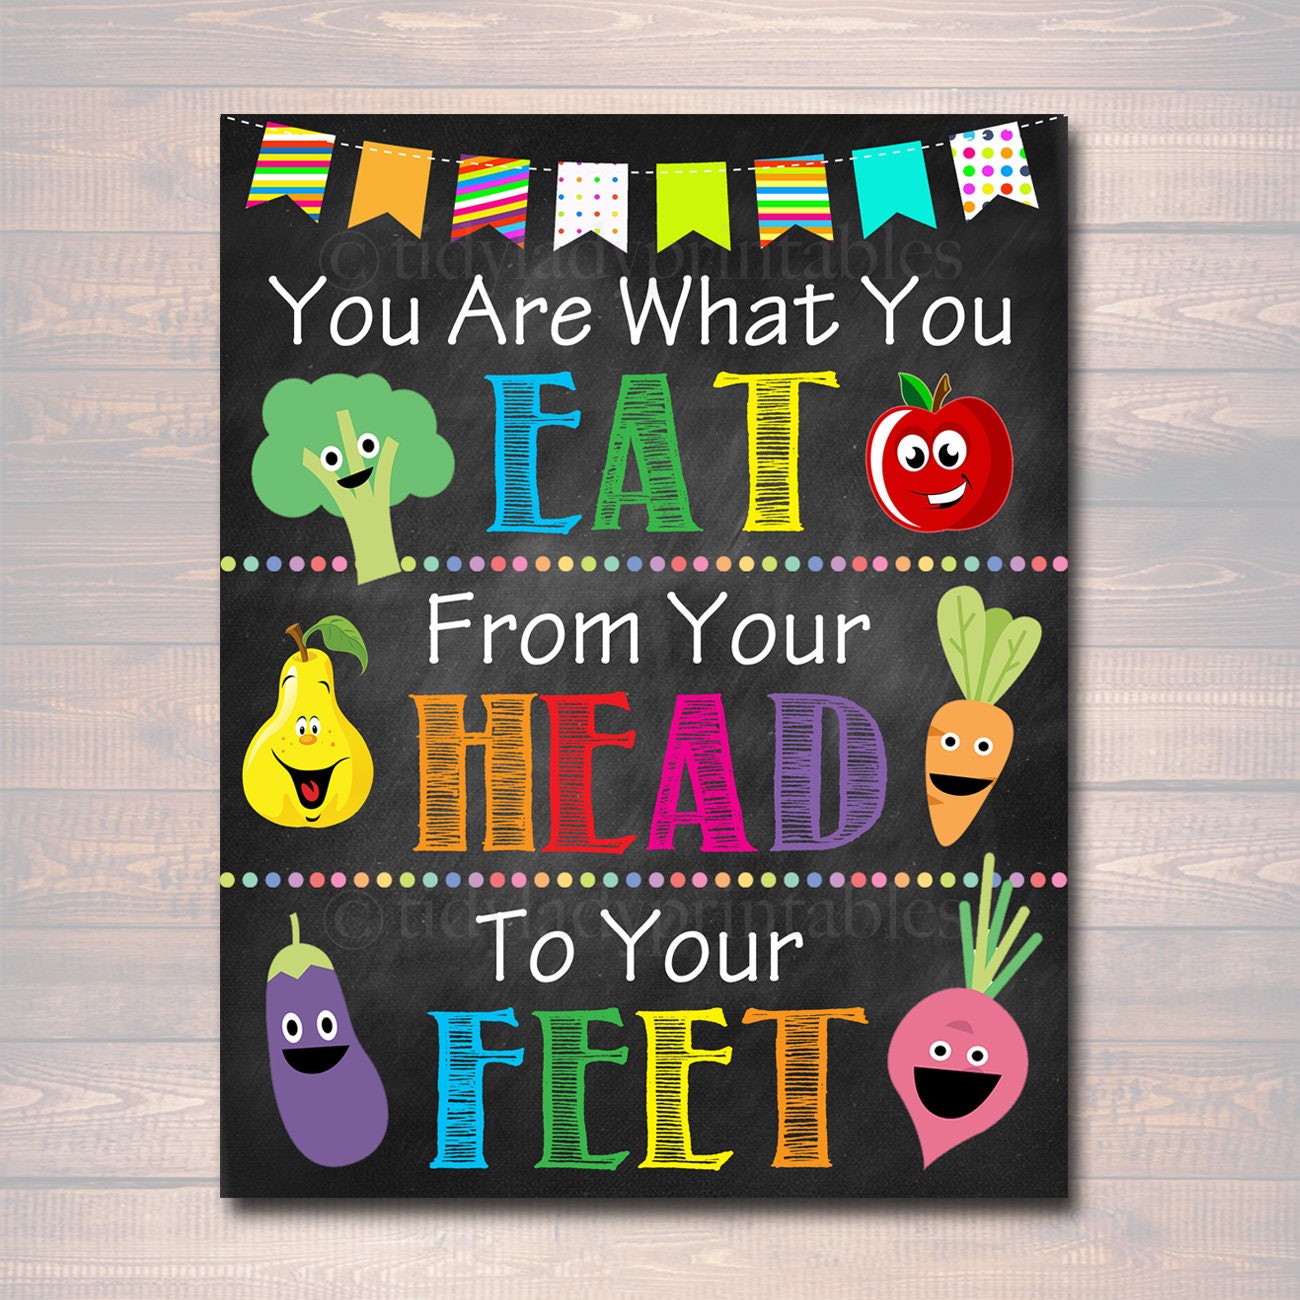 School Health Poster Cafeteria Poster Printable Instant - Etsy Finland